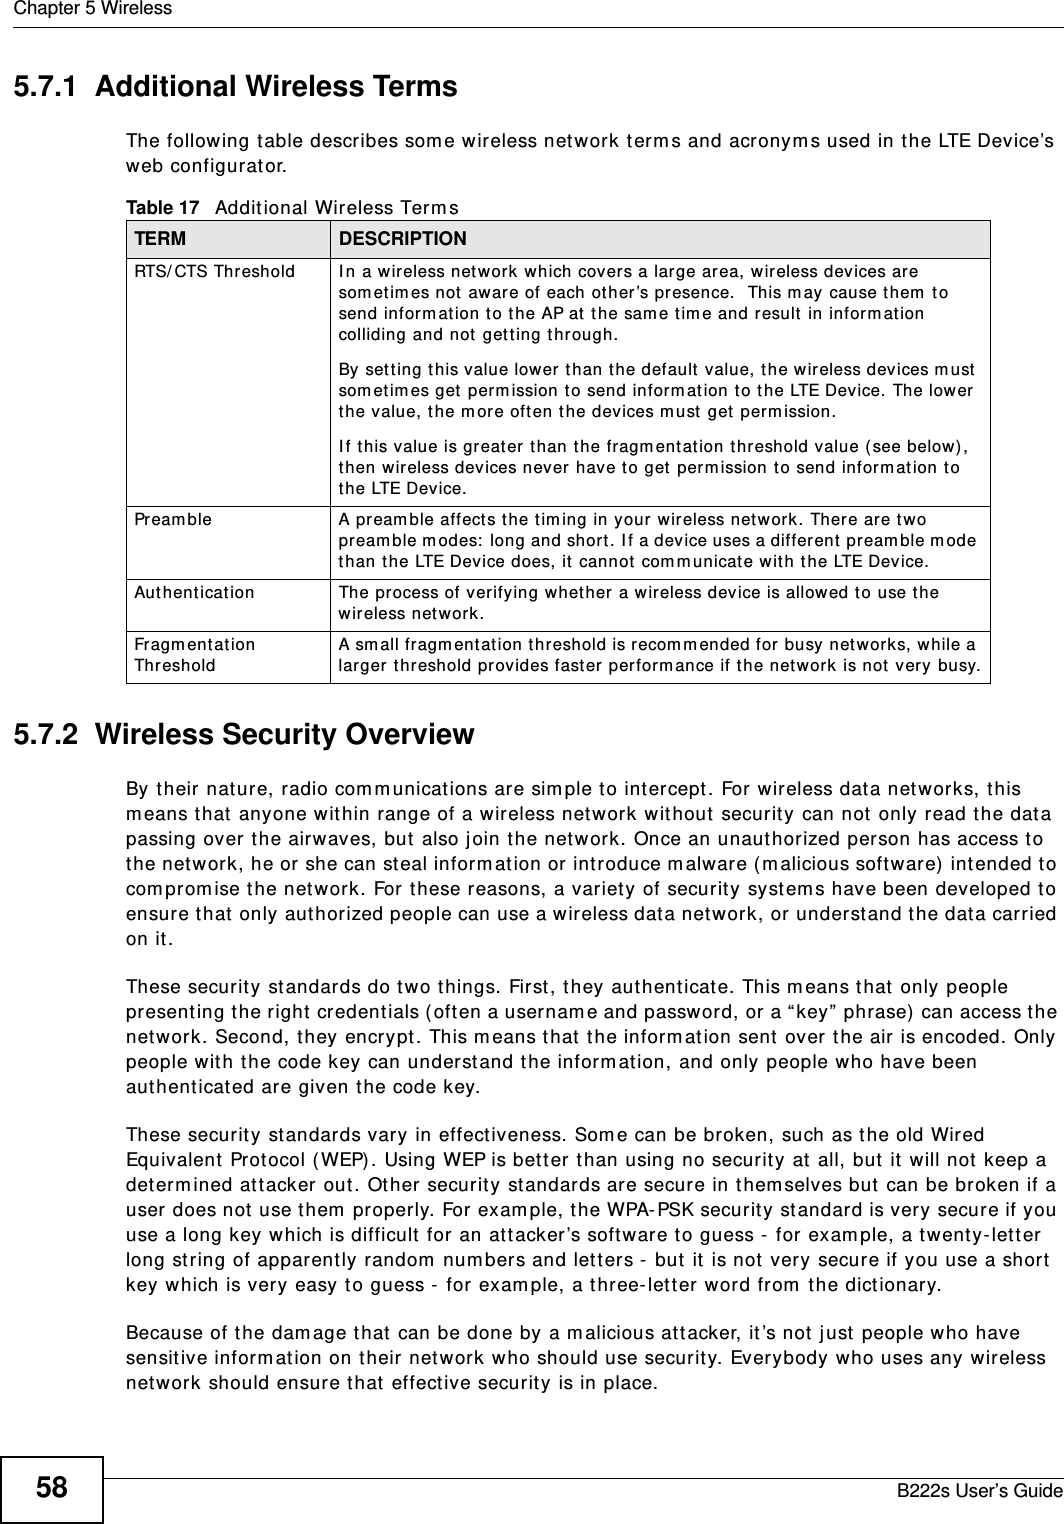 Chapter 5 WirelessB222s User’s Guide585.7.1  Additional Wireless TermsThe following t able describes som e wireless network t erm s and acronym s used in the LTE Device’s web configurat or.5.7.2  Wireless Security OverviewBy their nature, radio com m unicat ions are sim ple to int ercept . For w ireless data networks, this m eans t hat  anyone wit hin range of a wireless net work without  security can not only read the dat a passing over the airwaves, but  also j oin the network. Once an unaut horized person has access t o the network, he or she can st eal inform at ion or int roduce m alwar e ( m alicious soft ware)  intended t o com prom ise t he network. For t hese reasons, a variety of security system s have been developed t o ensure that  only authorized people can use a wireless dat a net work, or understand t he data carried on it .These security standards do t wo t hings. First , t hey aut hent icat e. This m eans t hat  only people present ing t he right  credent ials ( oft en a usernam e and password, or a “ key”  phrase)  can access t he network. Second, they encr ypt . This m eans t hat the inform at ion sent  over t he air  is encoded. Only people wit h t he code key can understand t he inform at ion, and only people who have been authent icat ed are given t he code key.These security standards vary in effect iveness. Som e can be broken, such as t he old Wired Equivalent  Protocol ( WEP) . Using WEP is bet t er t han using no securit y at  all, but it  will not keep a det erm ined at tacker out . Other security  standards are secure in t hem selves but can be br oken if a user does not  use t hem  properly. For exam ple, the WPA-PSK securit y  standard is very secure if you use a long key which is difficult  for an at t acker ’s software to guess -  for  exam ple, a twenty- letter long st ring of apparent ly random  num bers and let t ers -  but  it  is not very secure if you use a short  key which is very easy t o guess -  for exam ple, a three- lett er w ord from  t he dictionary.Because of t he dam age t hat  can be done by a m alicious at tacker, it ’s not  j ust people who have sensit ive inform ation on t heir network who should use securit y. Everybody who uses any wireless network should ensure t hat  effect ive securit y is in place.Table 17   Addit ional Wireless Term sTERM DESCRIPTIONRTS/ CTS Threshold I n a wireless network w hich covers a large area, wir eless devices are som etim es not aware of each ot her’s presence.  This m ay cause t hem  t o send infor m at ion to t he AP at  t he sam e t im e and result  in inform ation colliding and not  getting t hrough.By set ting t his value lower t han t he default  value, t he wir eless devices m ust  som et im es get perm ission t o send inform ation to t he LTE Device. The lower the value, t he m ore oft en t he devices m ust  get perm ission.I f this value is greater t han the fragm entat ion t hreshold value ( see below), then w ireless devices never have t o get  perm ission t o send inform at ion to the LTE Device.Pream ble A pream ble affects t he t im ing in your wireless netw ork. There are t wo pream ble m odes:  long and short . I f a device uses a different  pream ble m ode than t he LTE Device does, it  cannot com m unicate w ith the LTE Device.Aut hent icat ion The process of verifying whet her a wireless device is allowed t o use t he wireless net work.Fragm ent ation ThresholdA sm all fragm ent ation t hreshold is recom m ended for busy network s, while a larger t hreshold pr ovides fast er perform ance if the net work is not  very  busy.